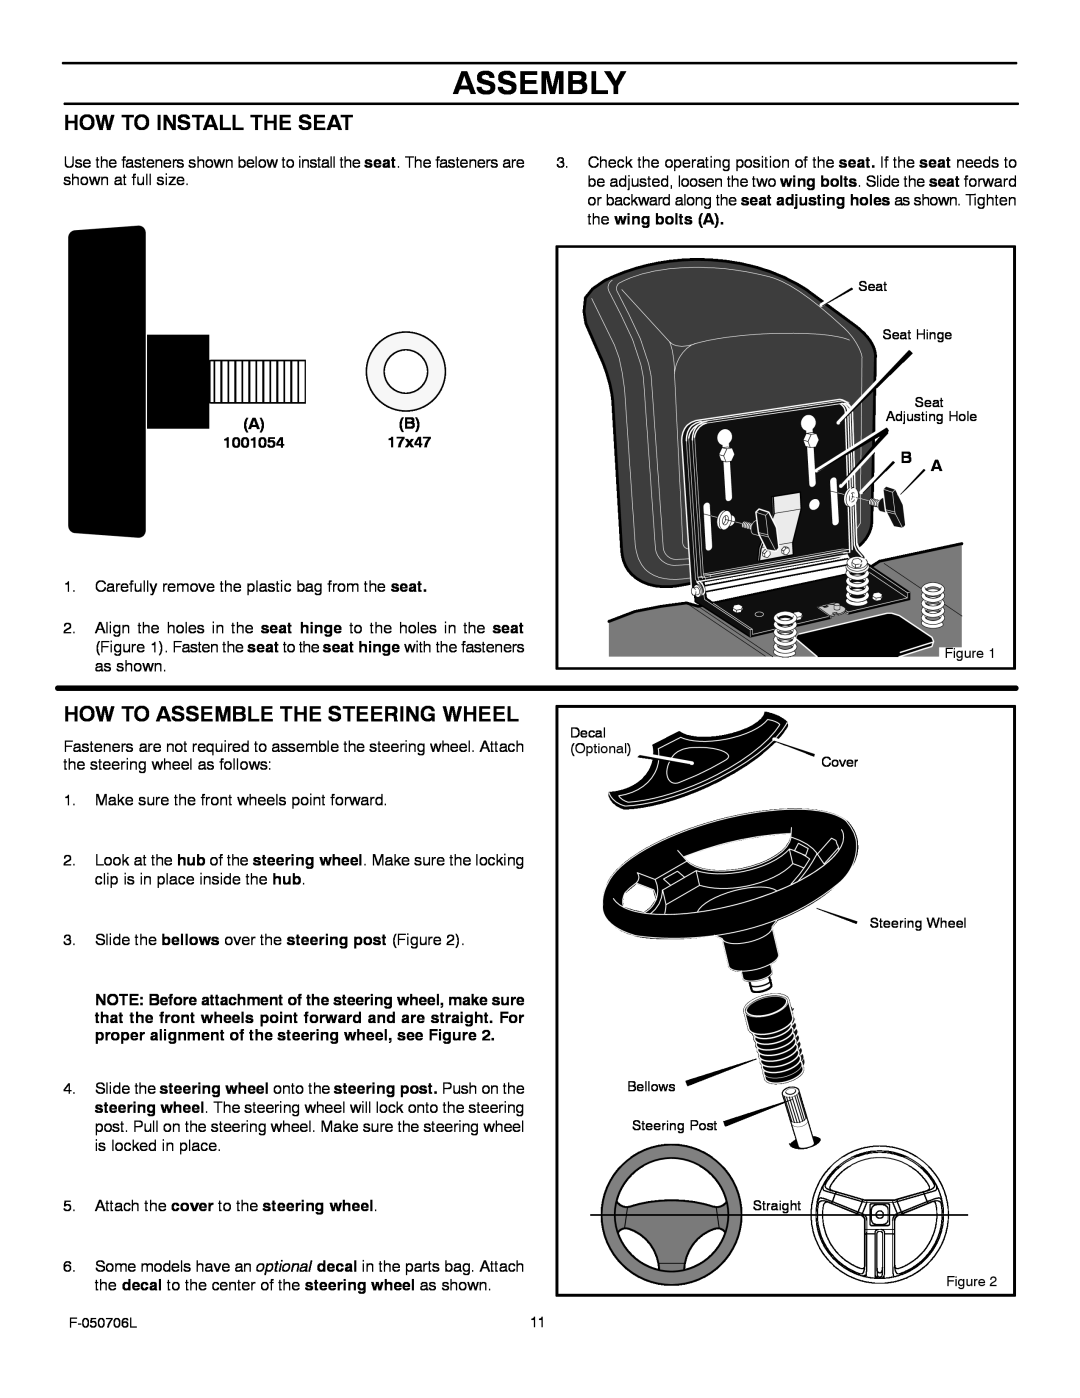 Murray 425014x92B manual Assembly, How To Install The Seat, How To Assemble The Steering Wheel 